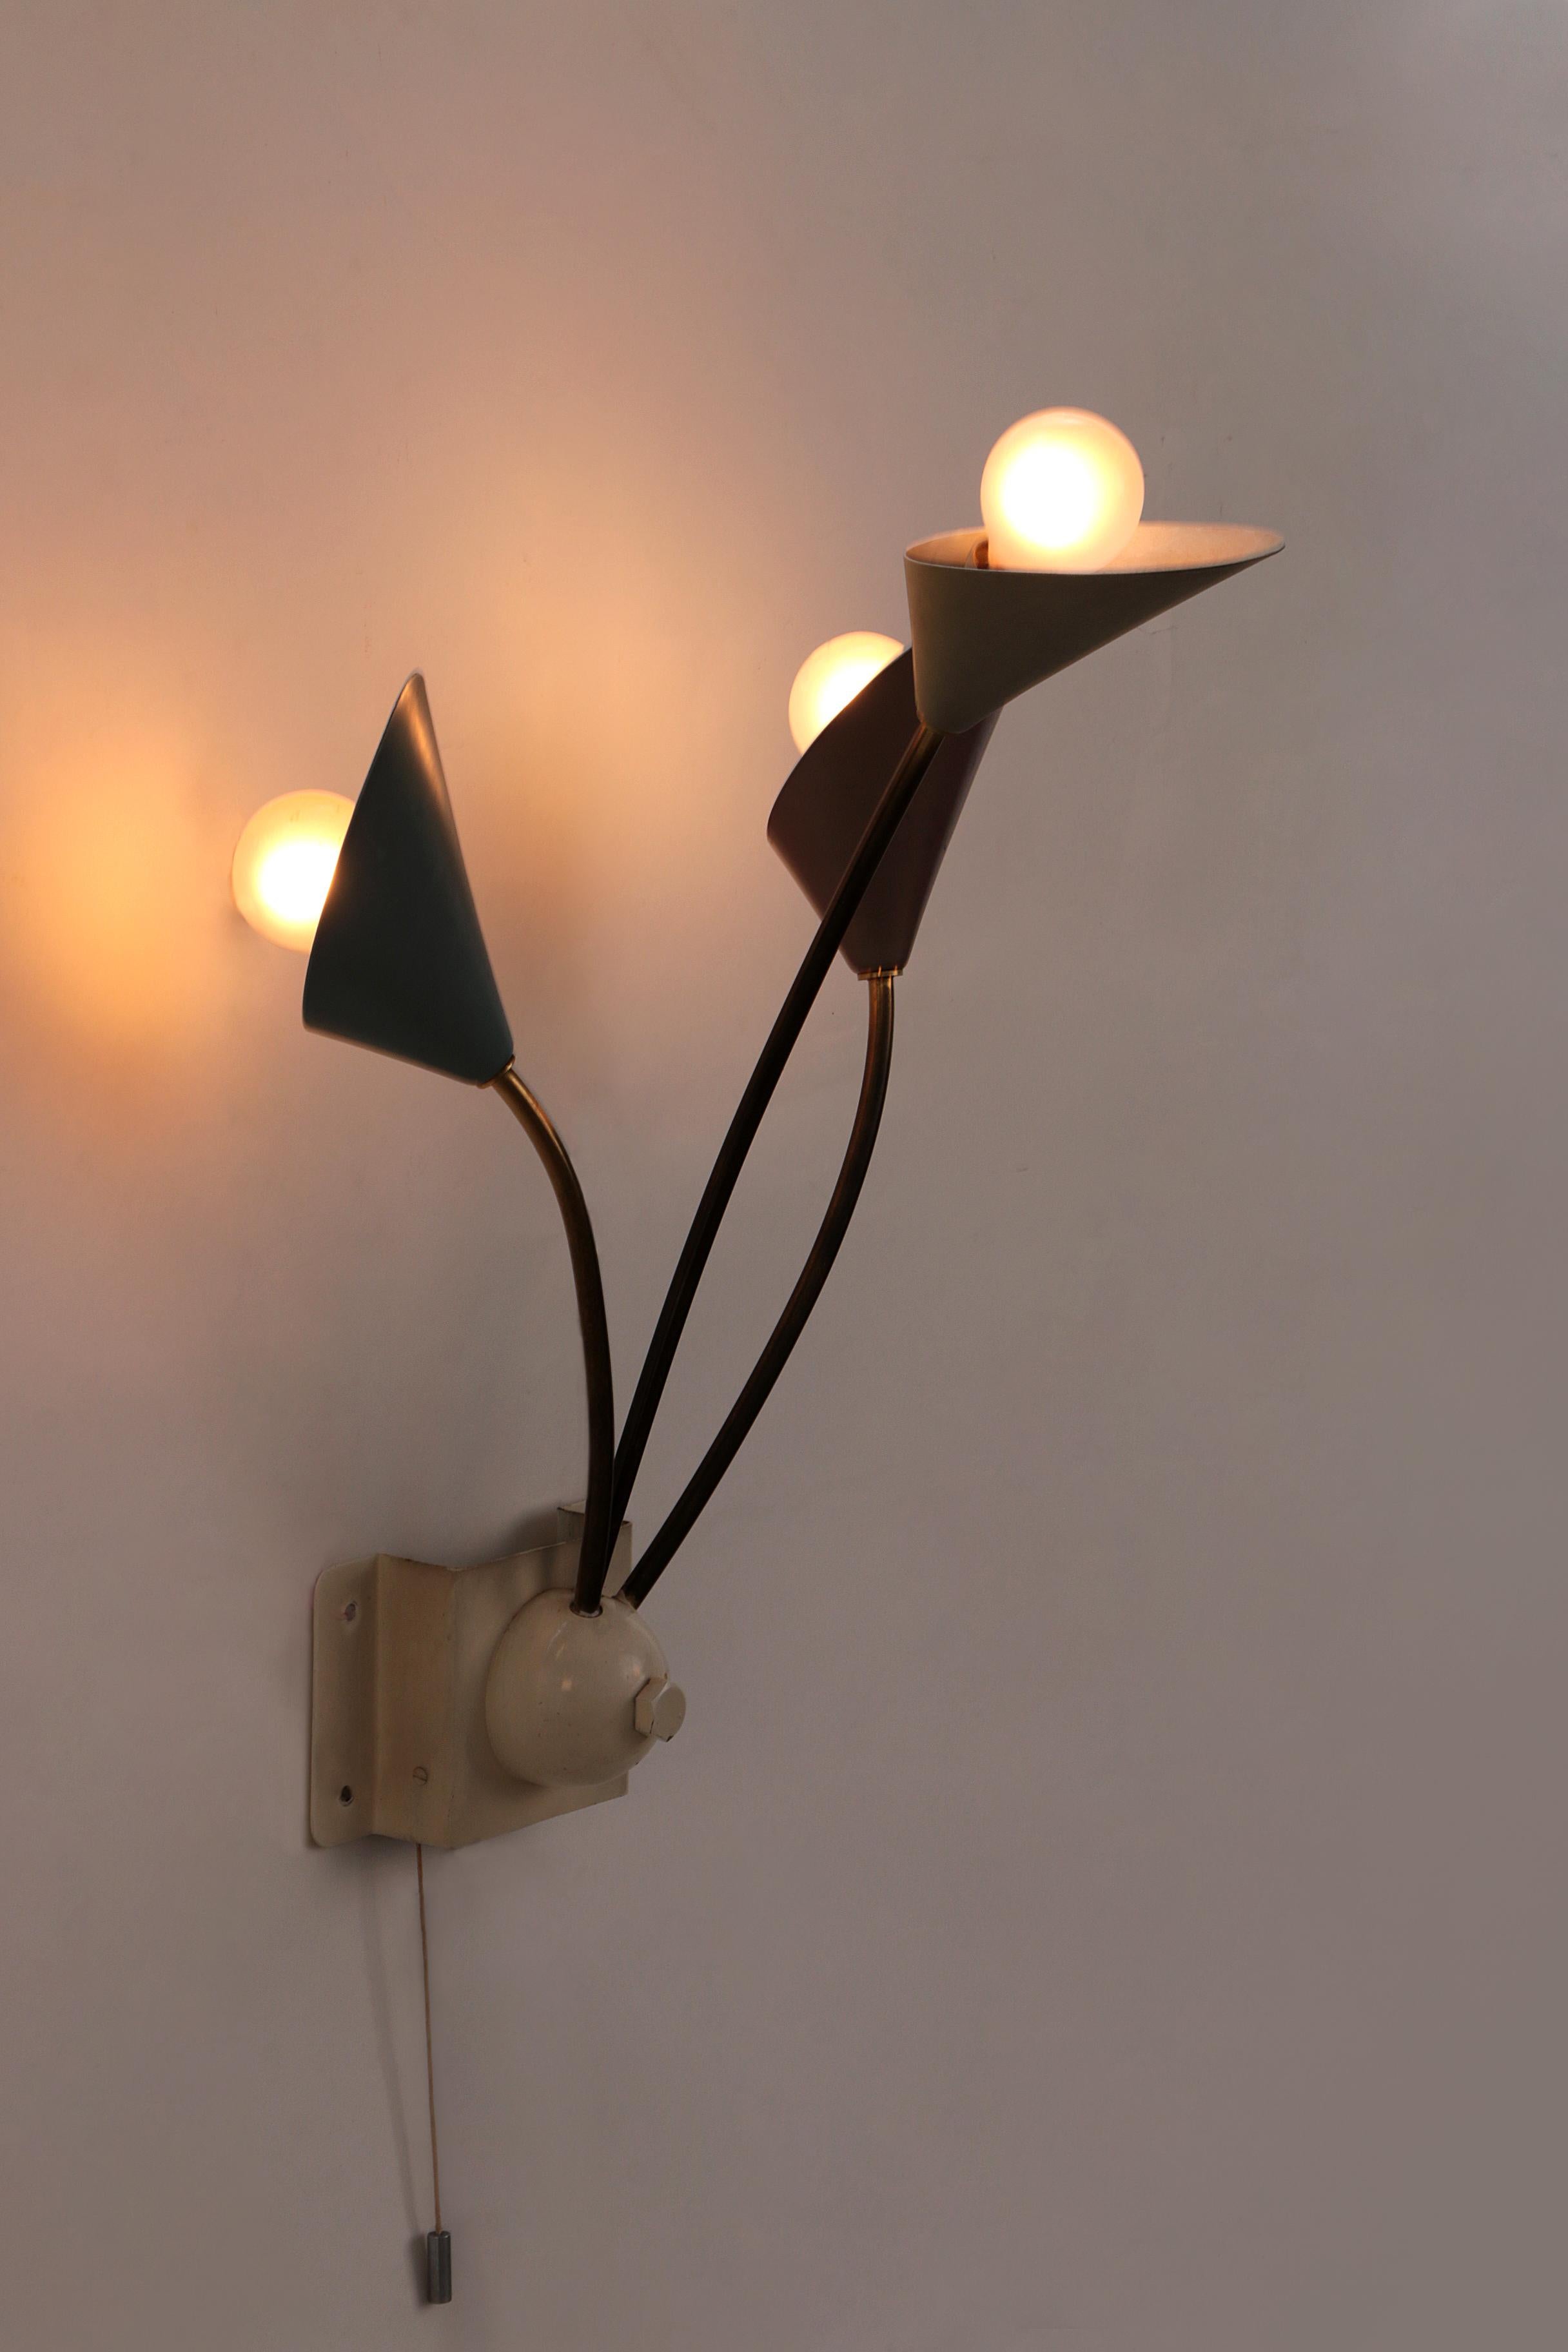 Mid-20th Century Vintage Wall Lamp with 3 Lights - Brass Metal, 1960 Denmark For Sale